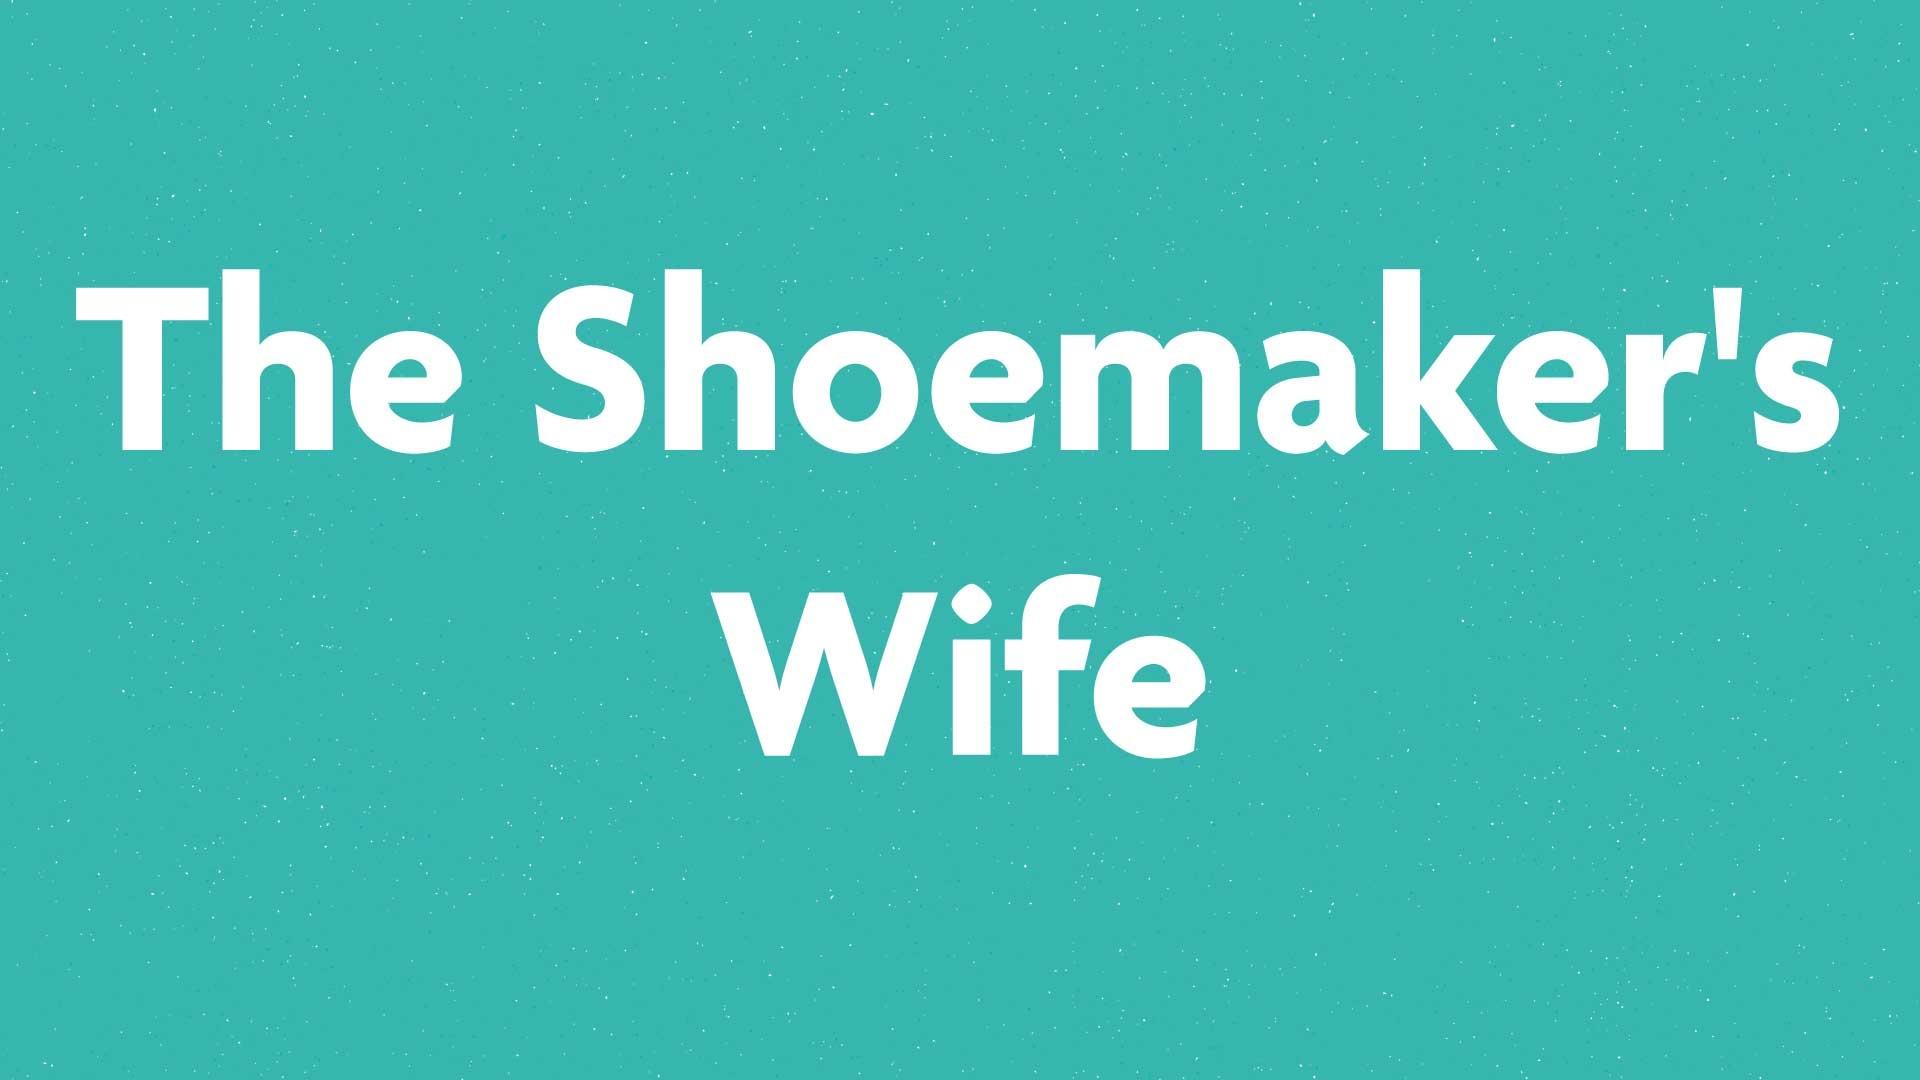 The Shoemaker's Wife book submission card on a green background.